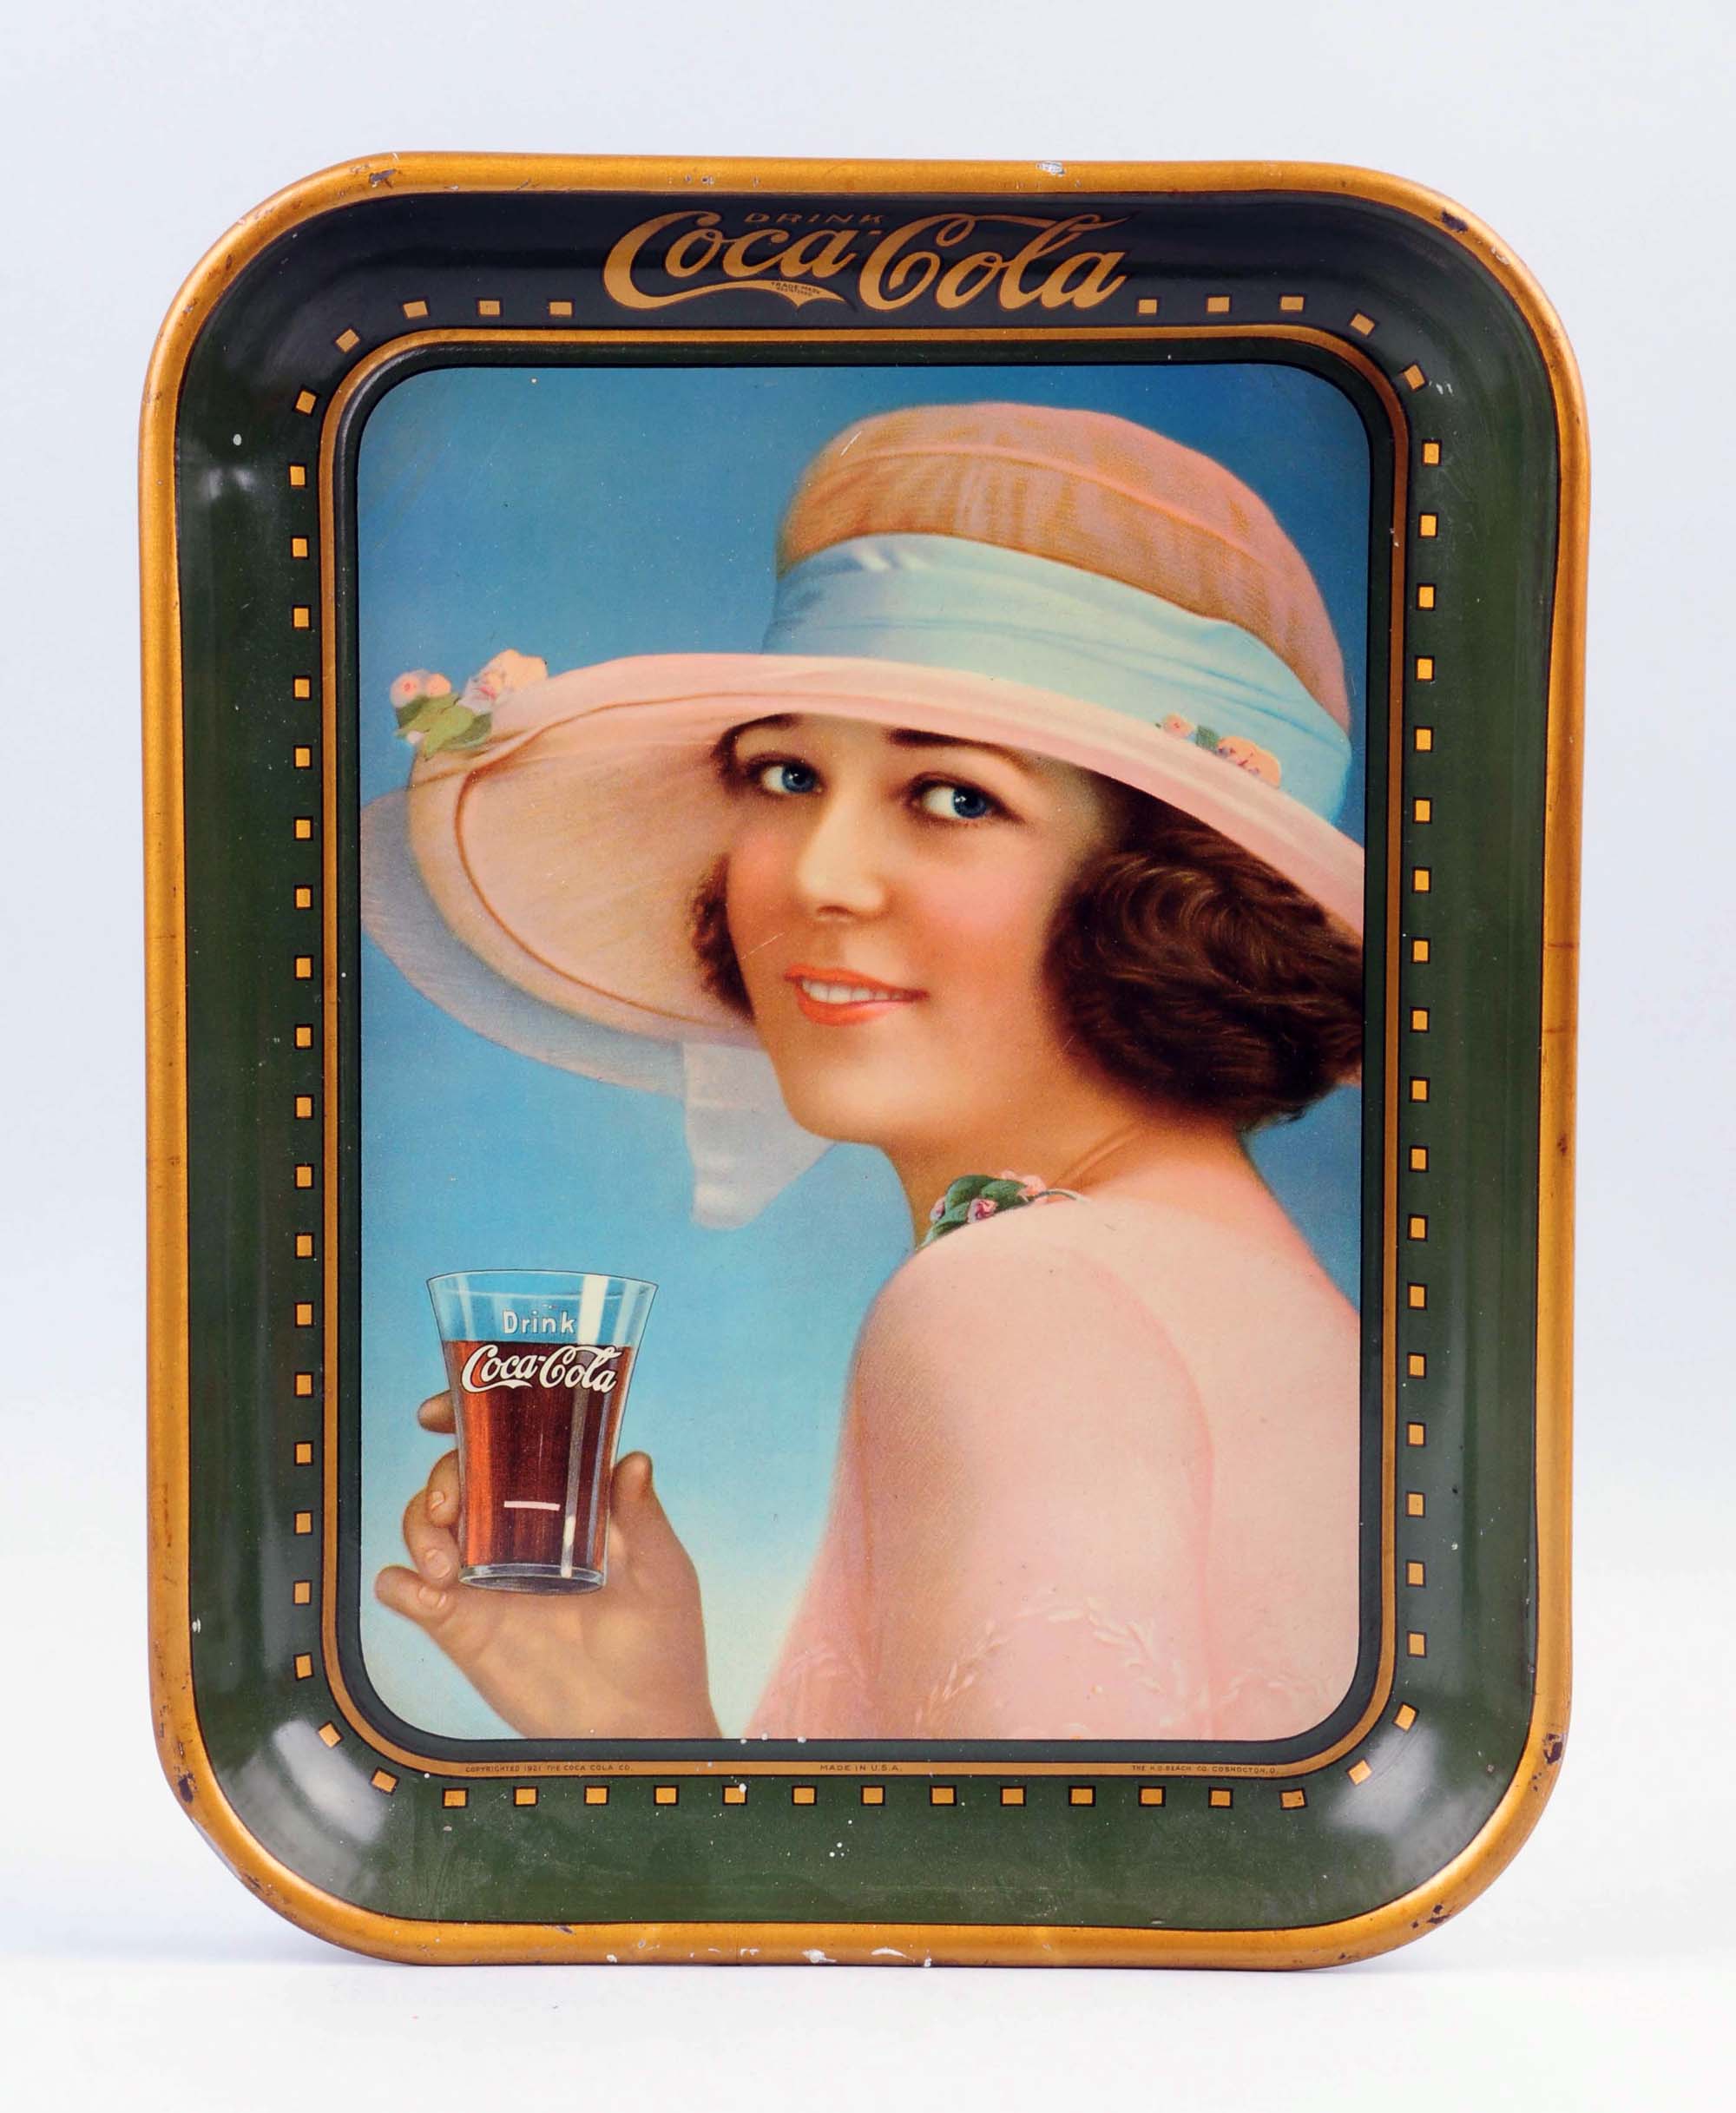 1922 Coca-Cola serving tray in excellent-plus to near-mint condition, est. $750-$1,250. Morphy Auctions image